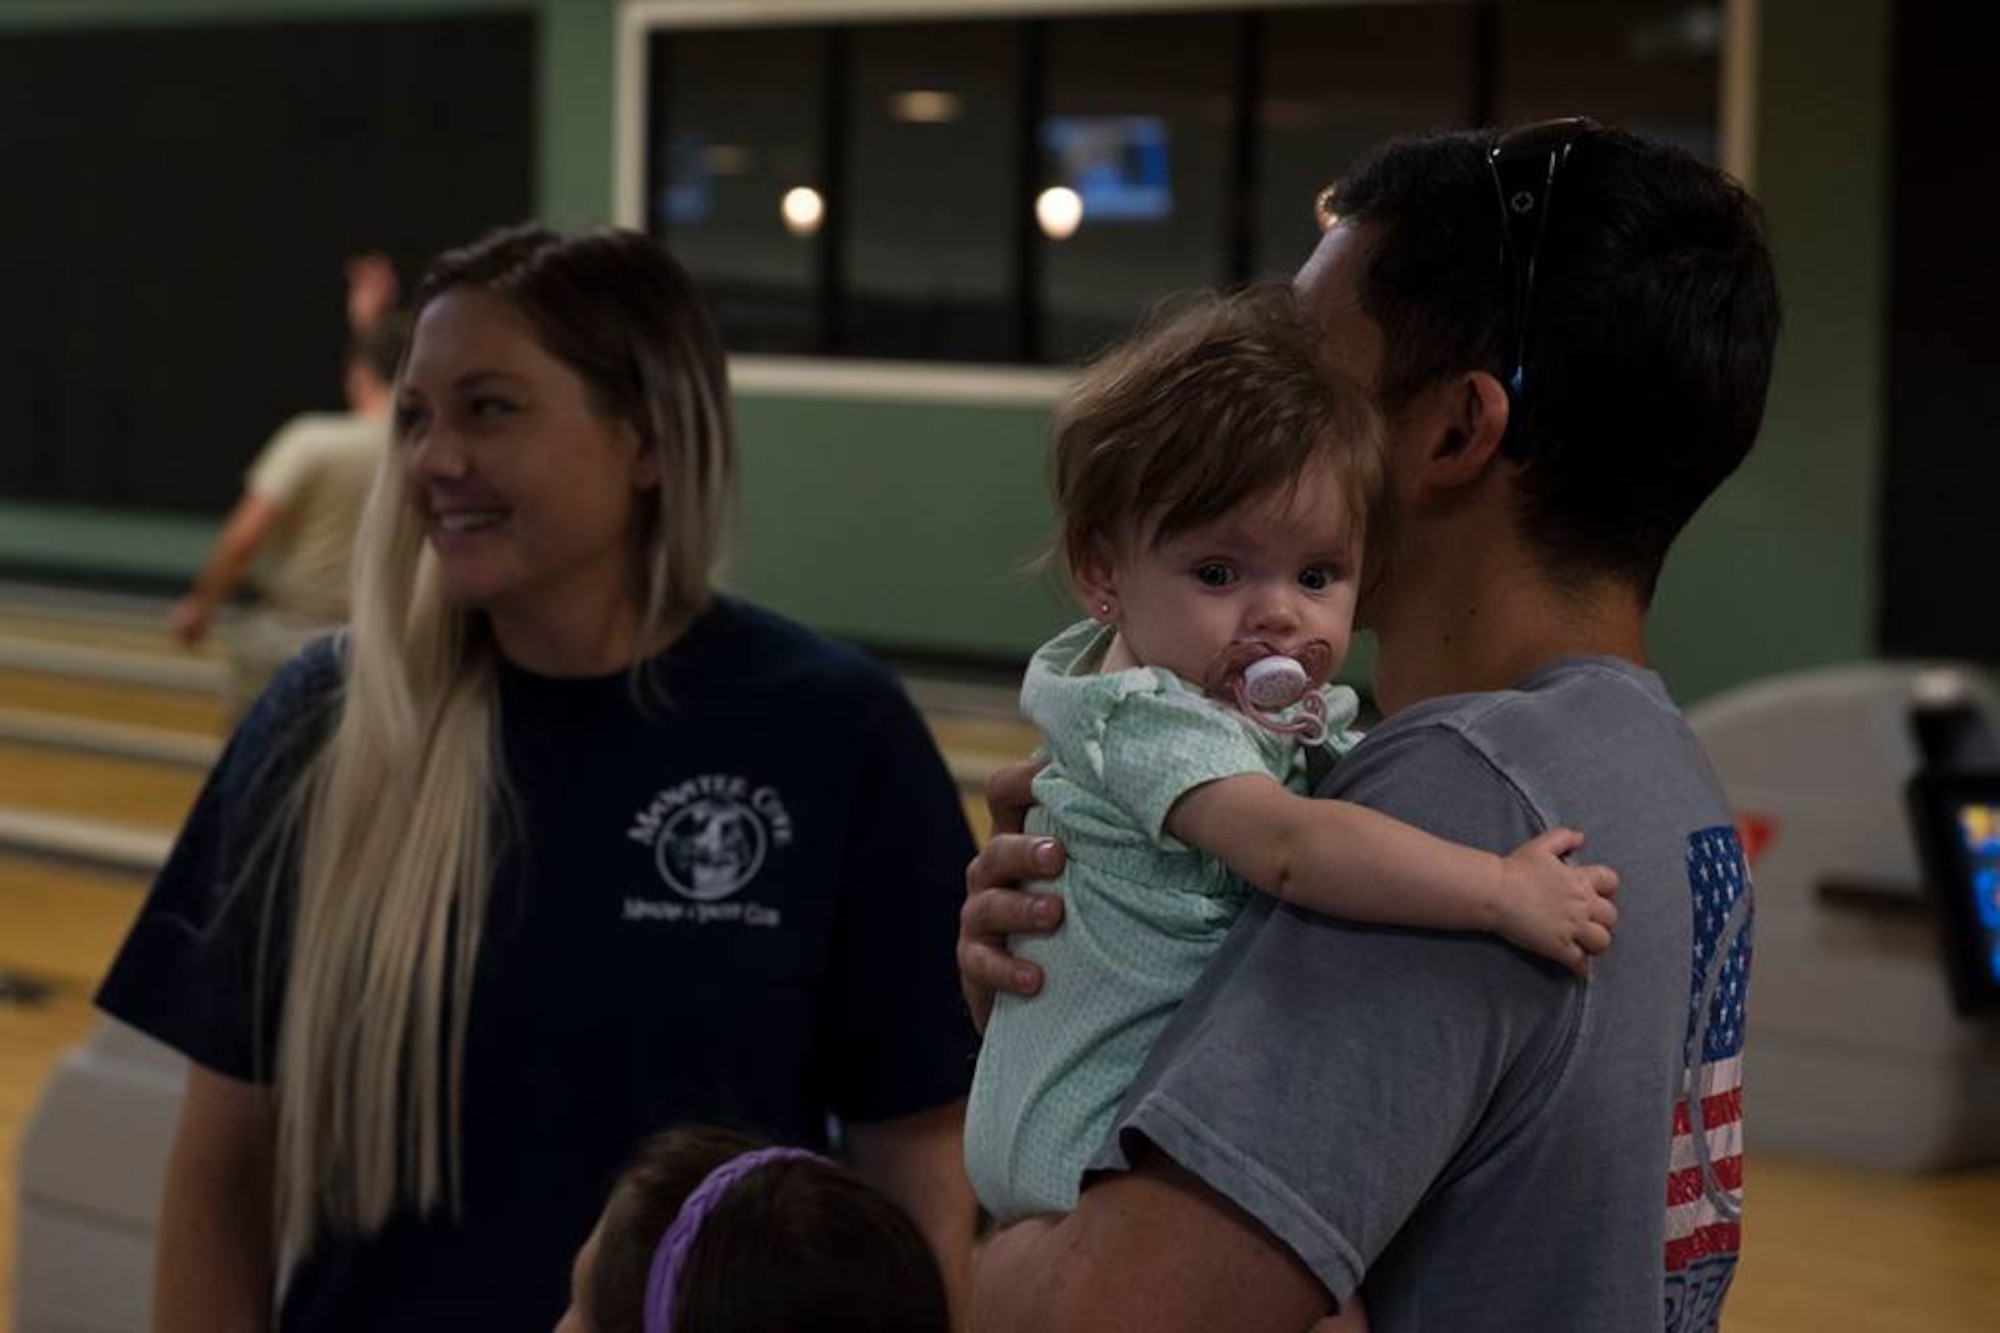 1st Lt. Adam Kriete, 337th Air Control Squadron student, and his family, bowl after arriving to Patrick Air Force Base from Tyndall AFB, Fla. Oct. 18, 2018. Tyndall AFB was damaged by Hurricane Michael which displaced approximately 11,000 people, to include the Kriete family who travelled back to Tyndall during a five hour window to recover their belongings.